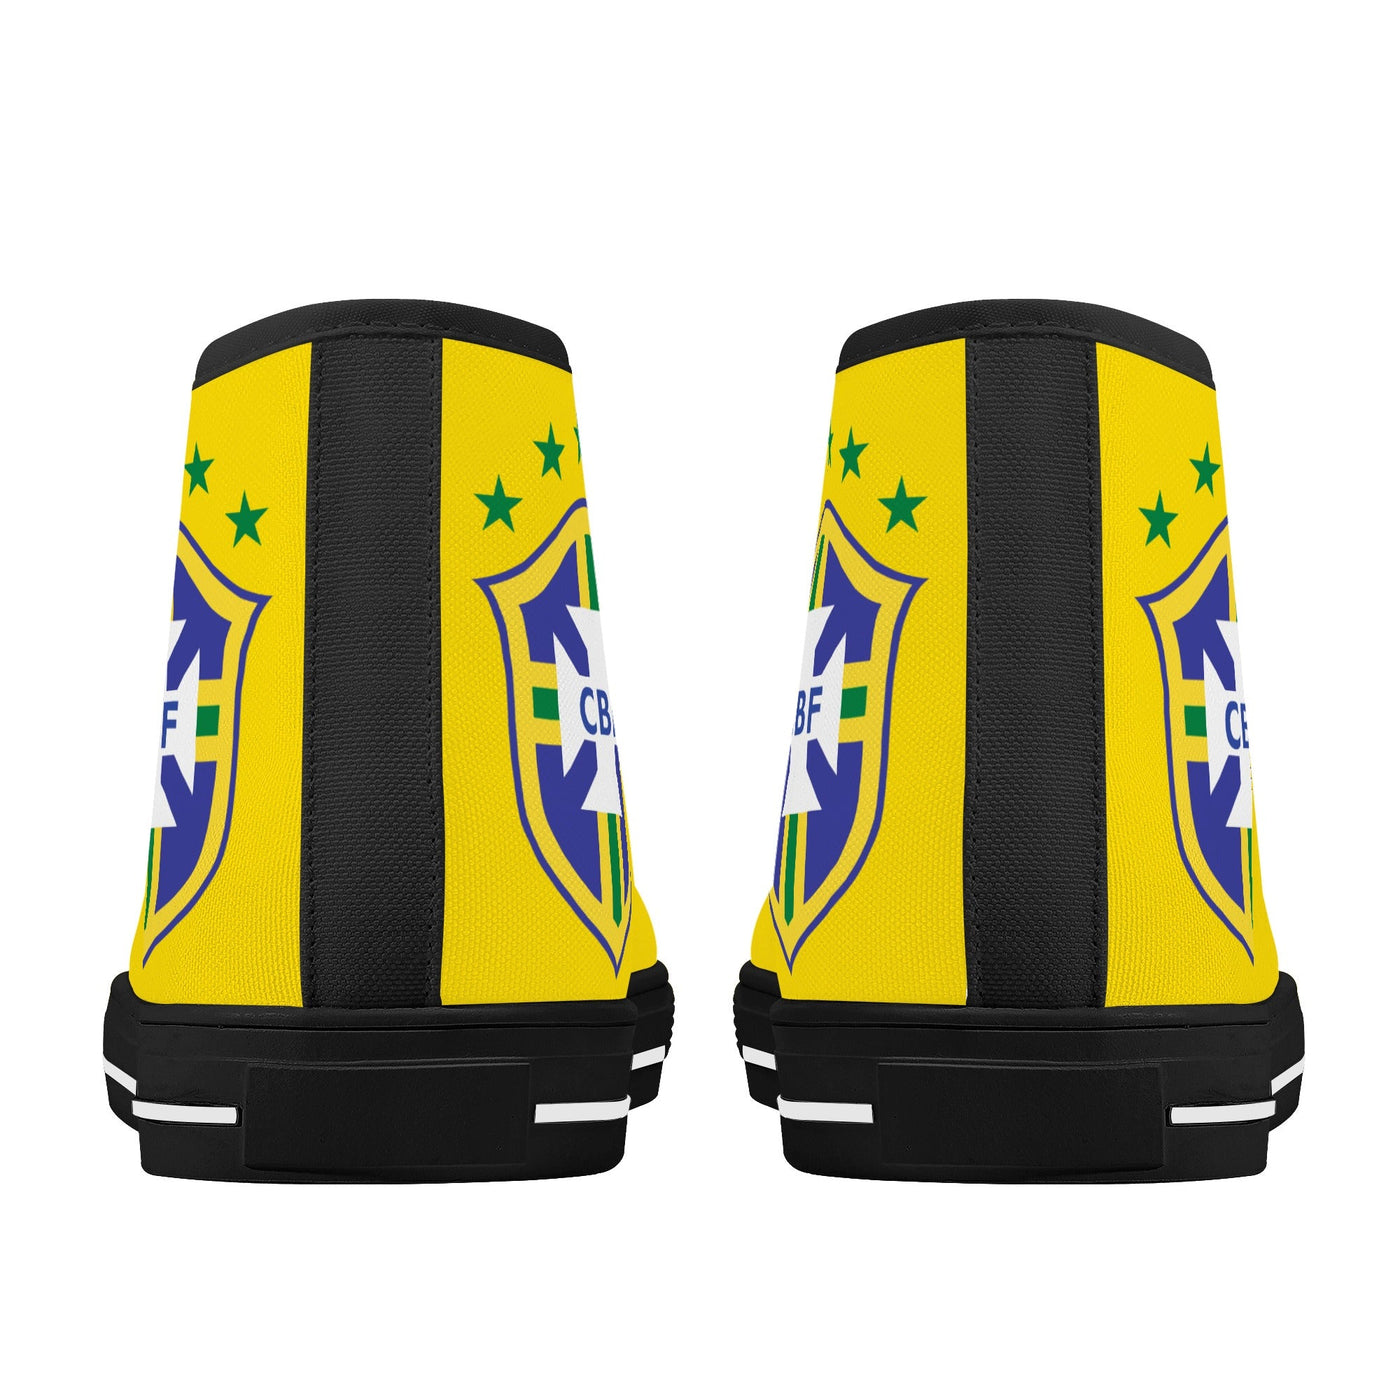 Brazil National Soccer Team Shoes | High Top Canvas Sneakers